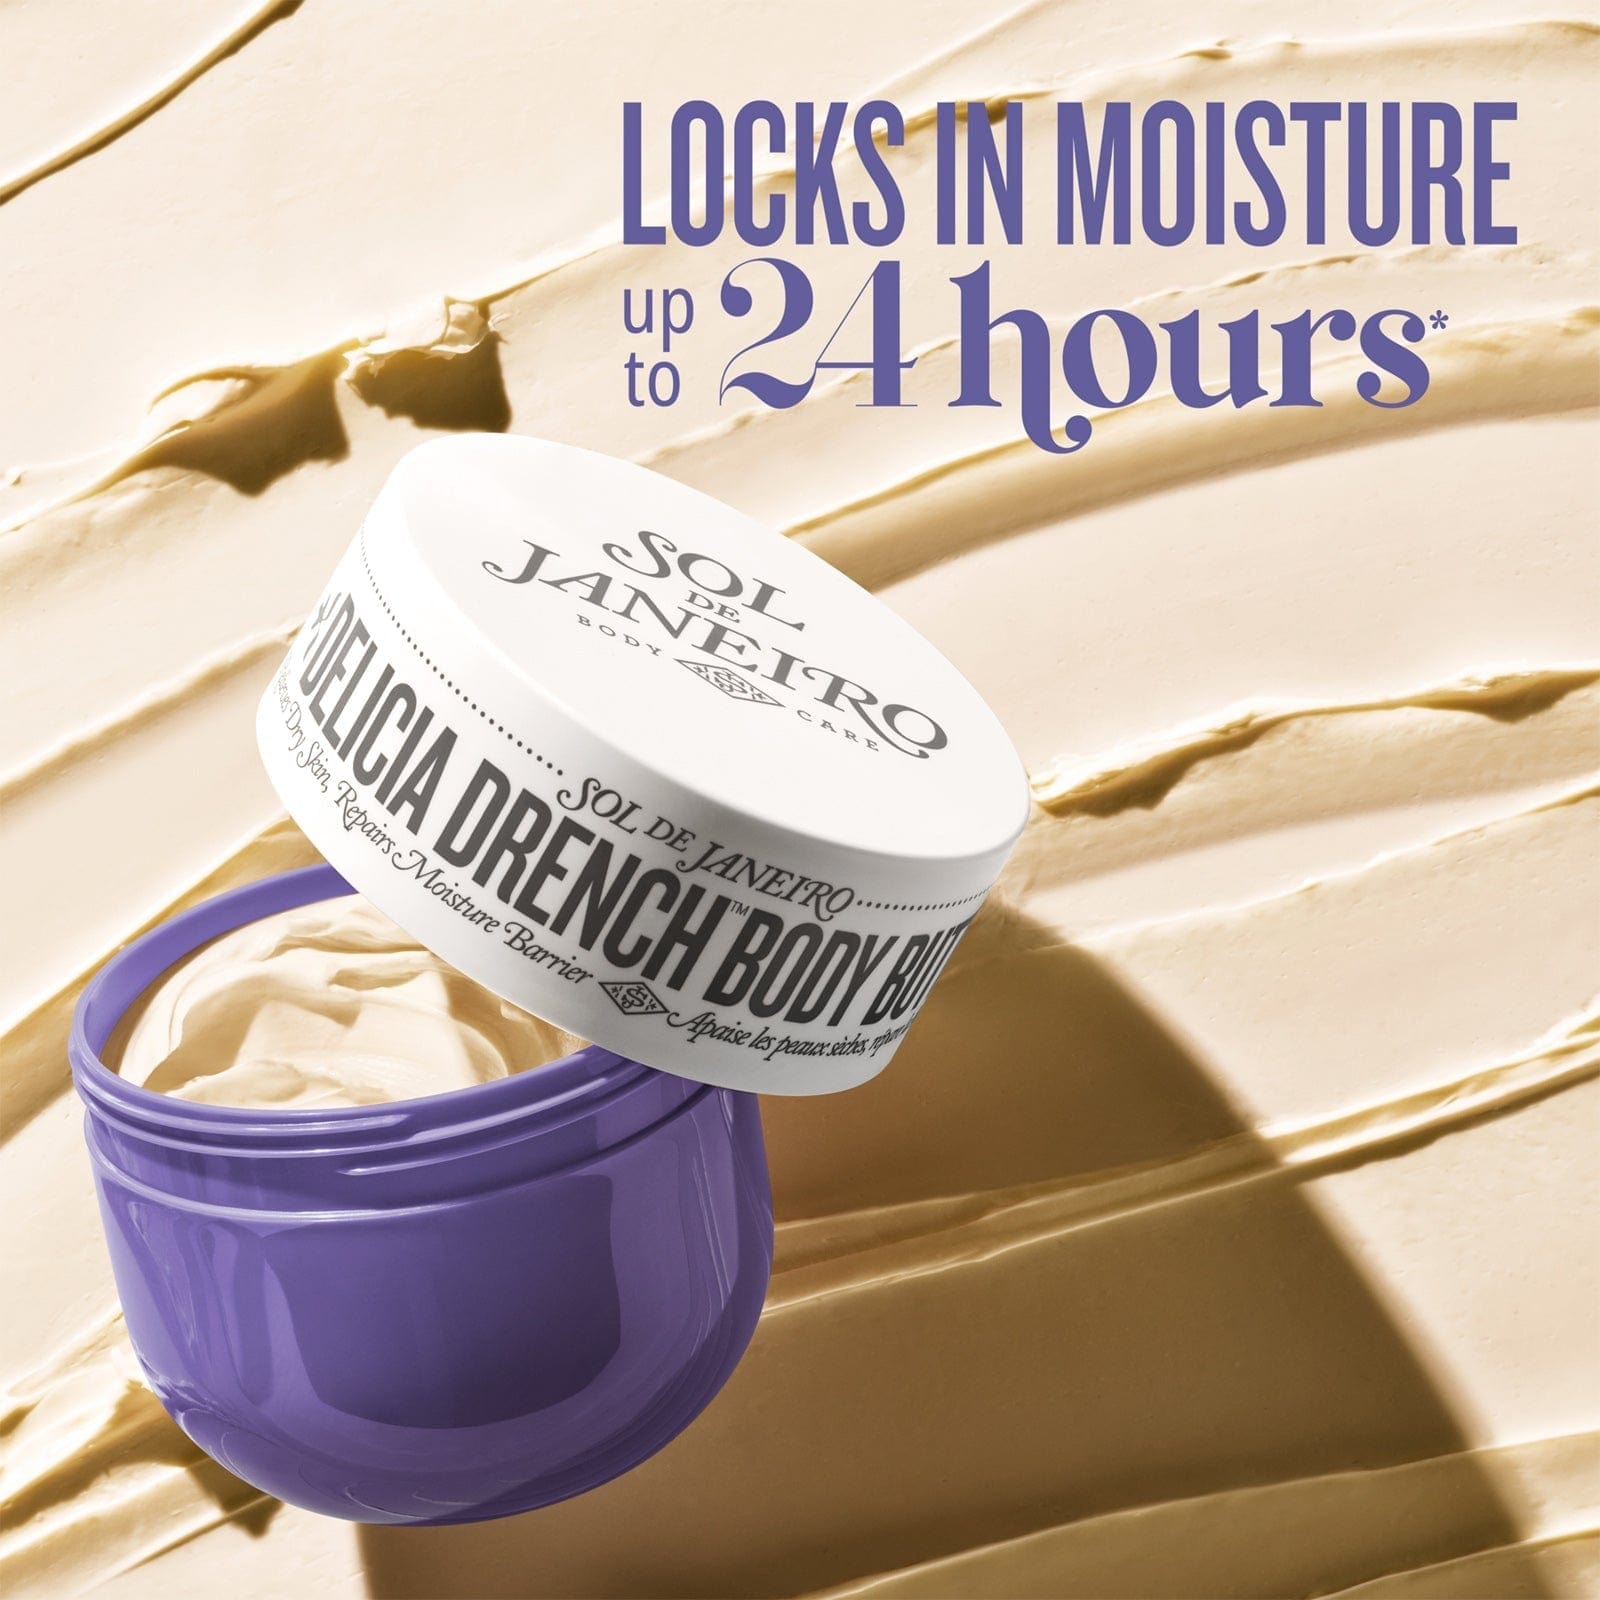 Locks in moisture up to 24 hours*